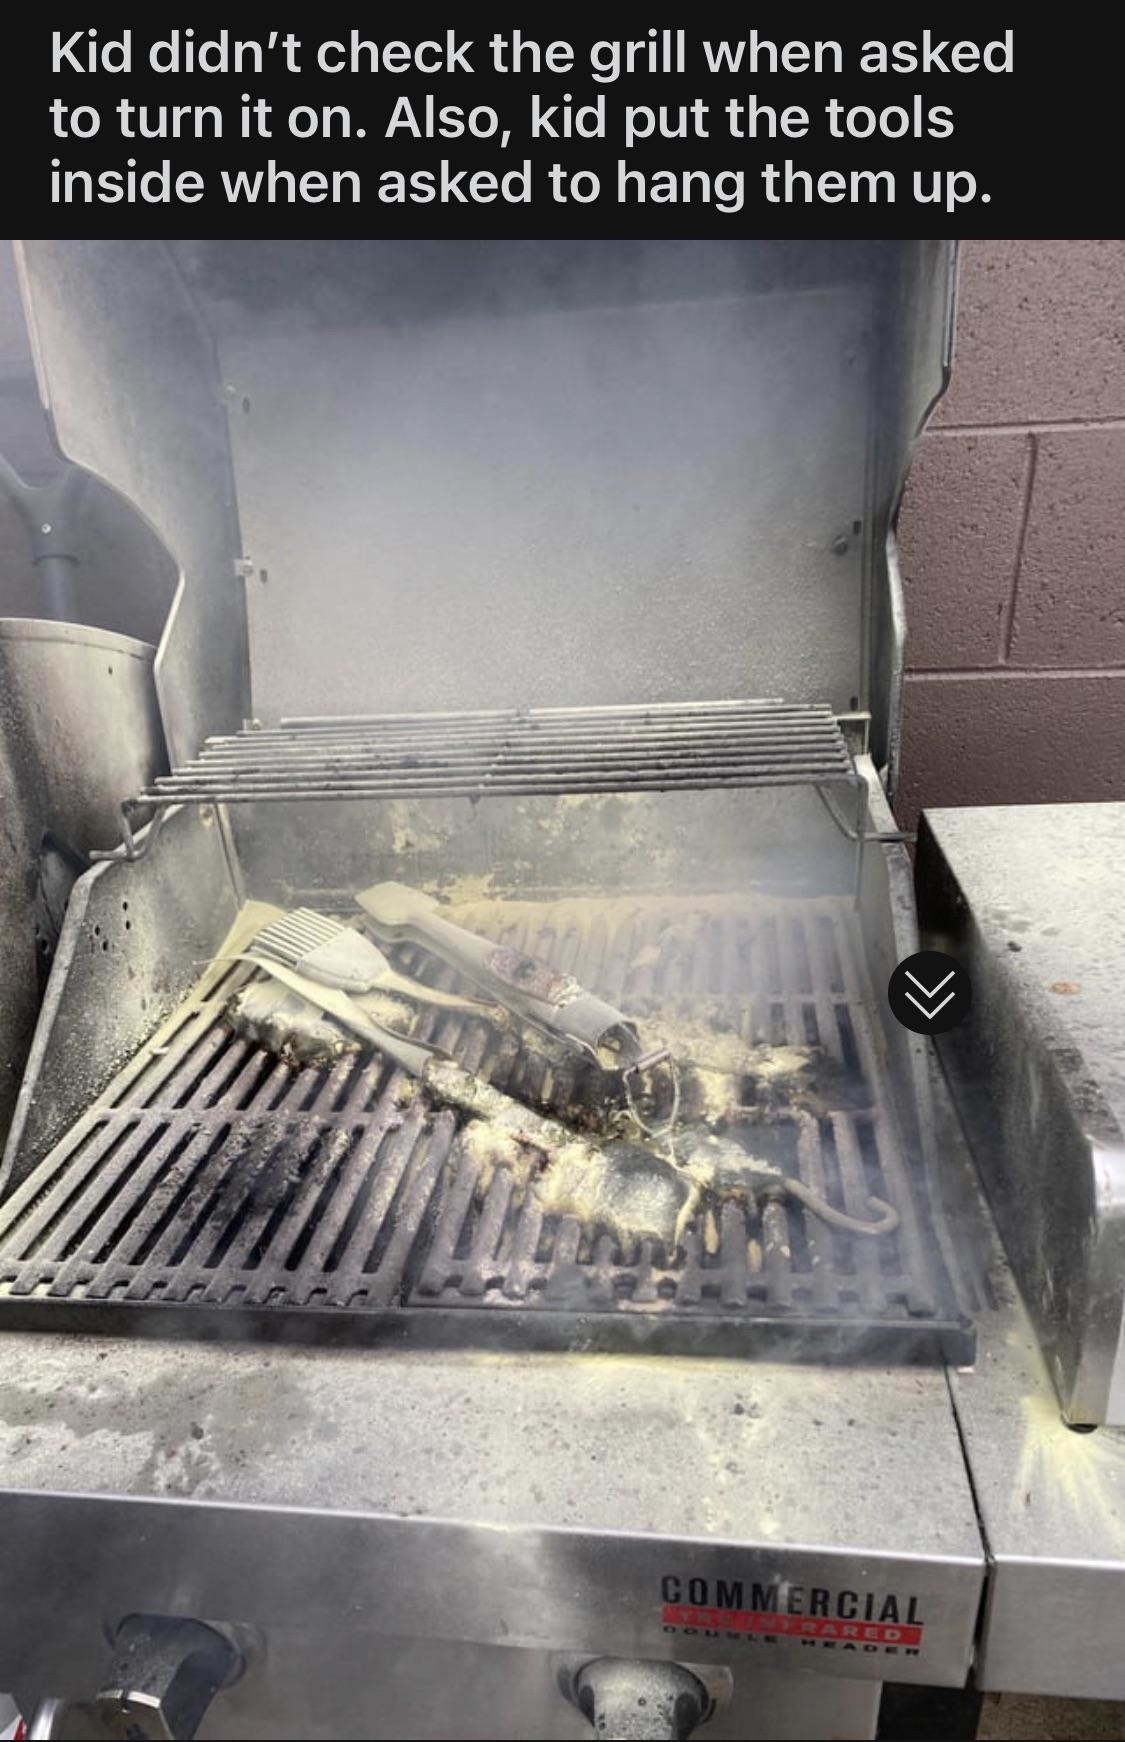 Burnt utensils on the grill because their kid didn&#x27;t check it before turning it on and put the utensils inside it instead of hanging them up